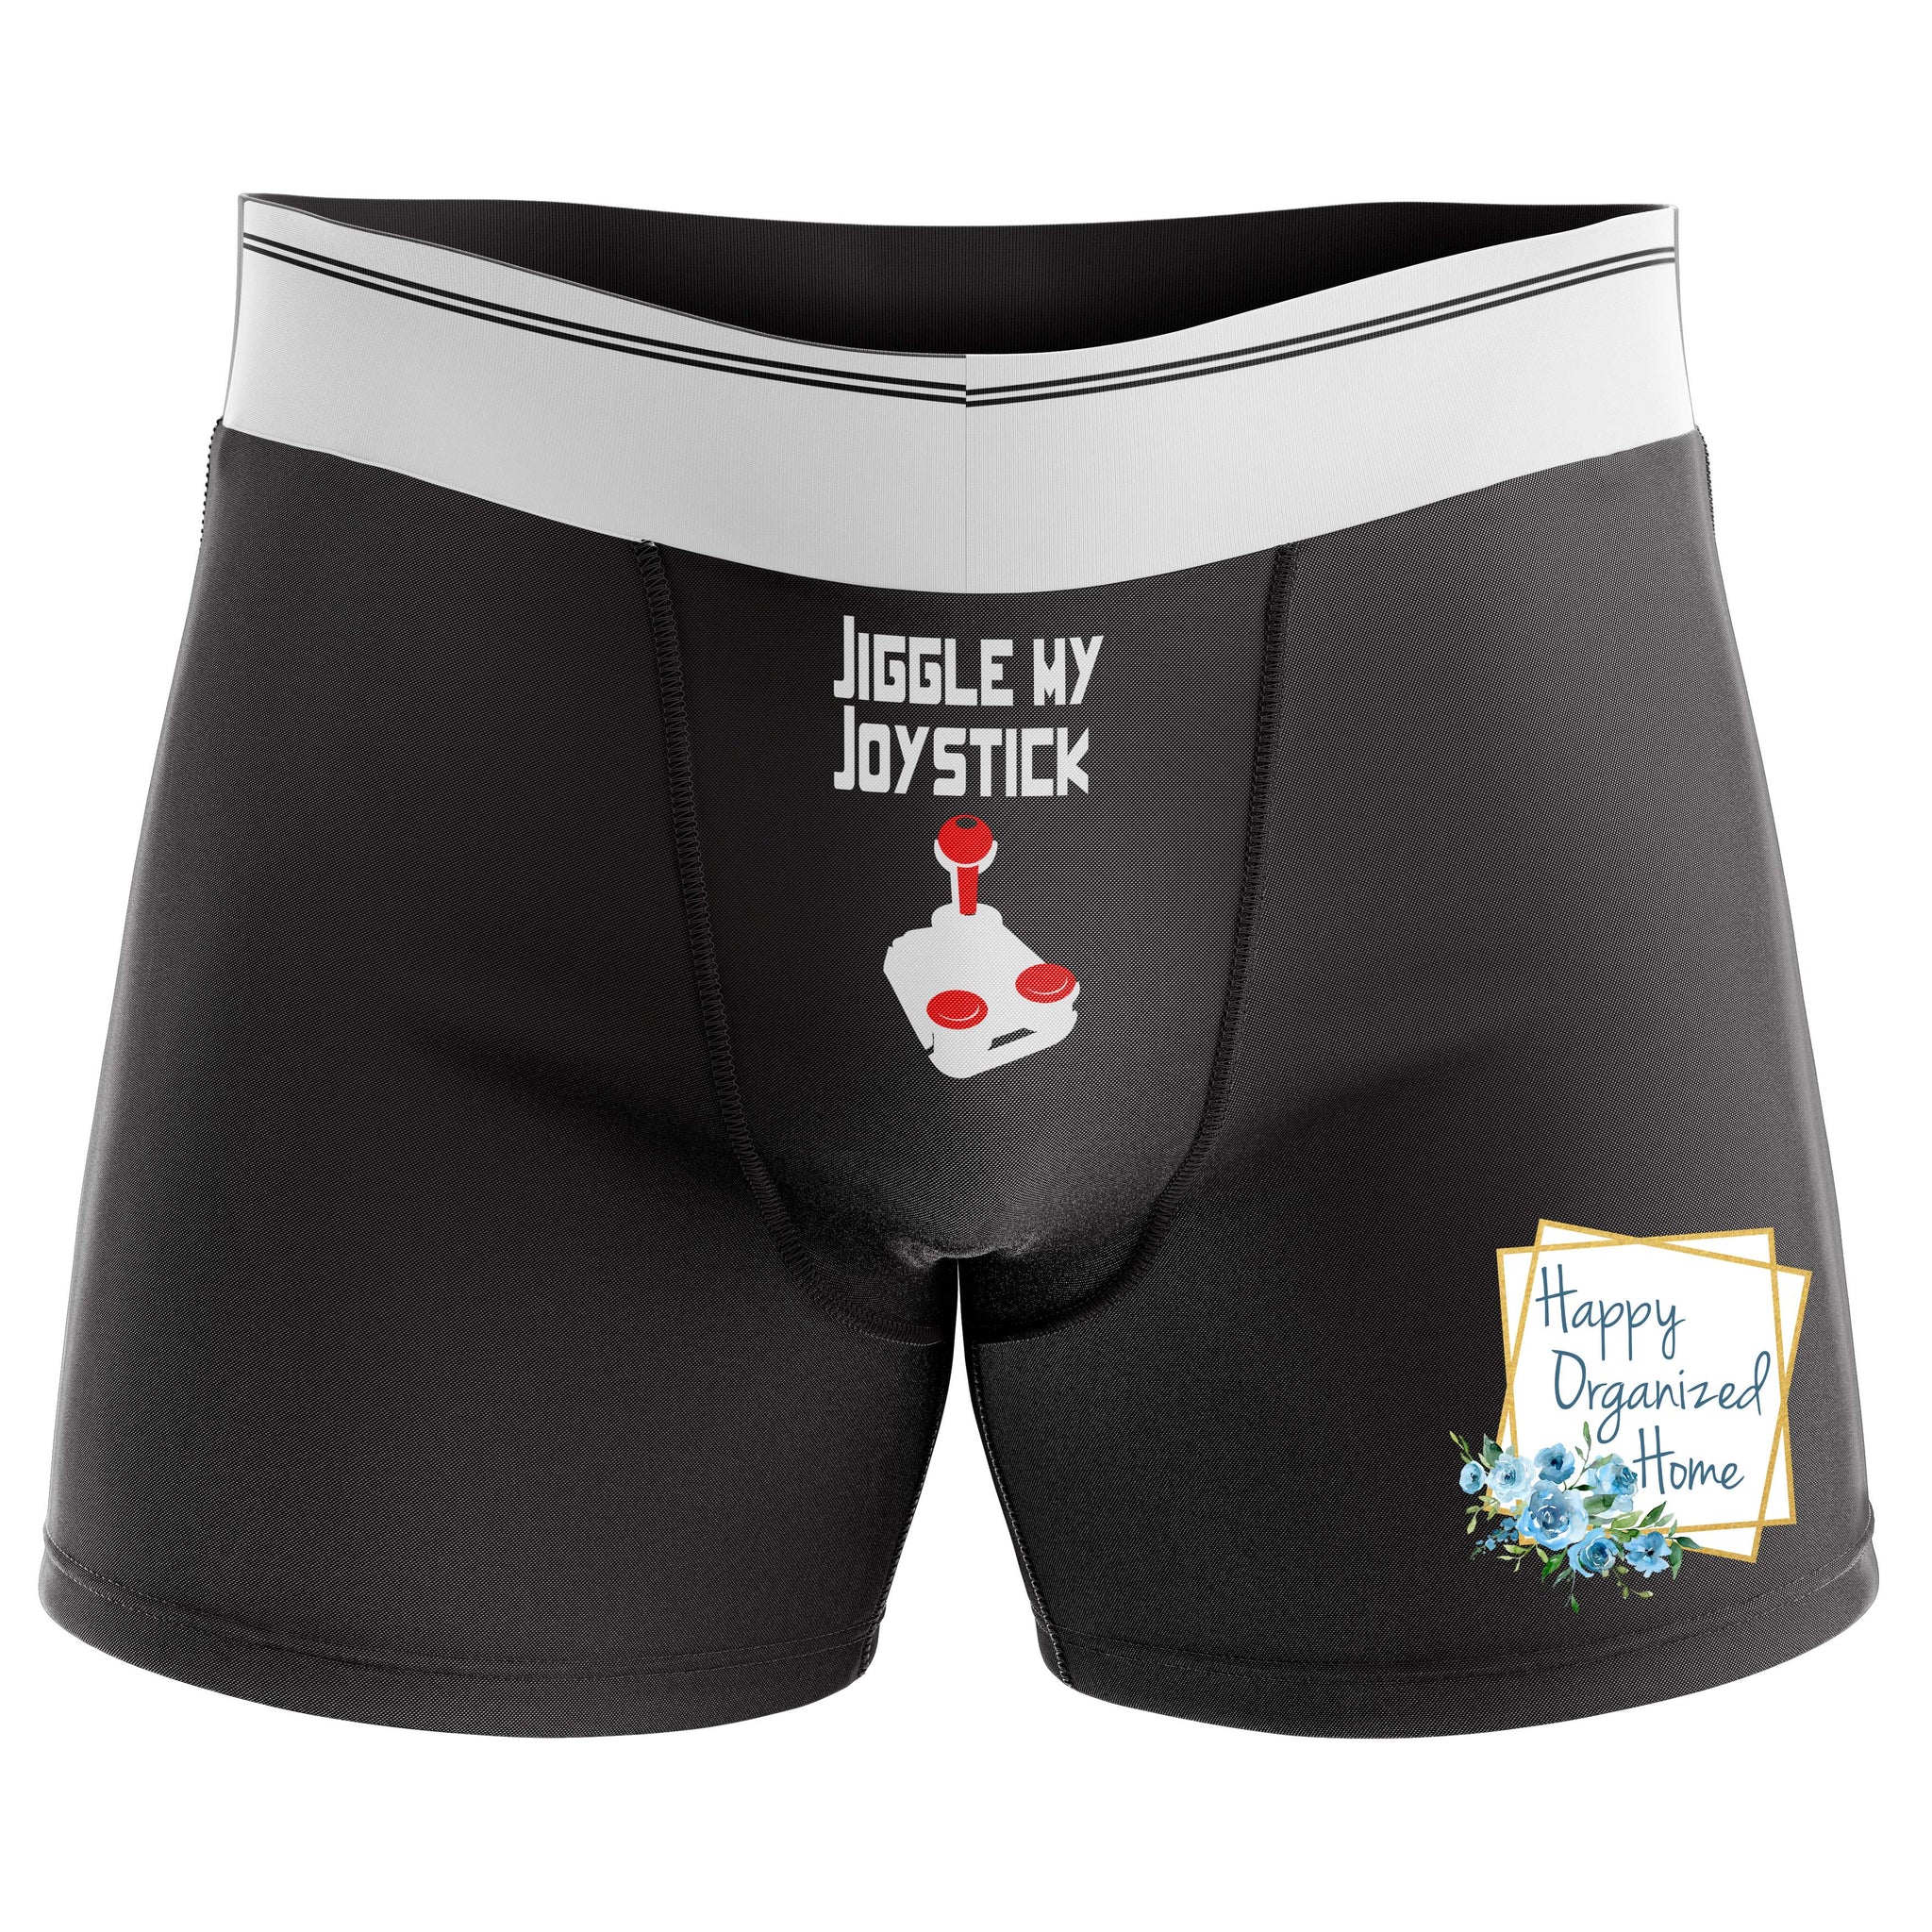 Rub Me For Luck Boxer Shorts